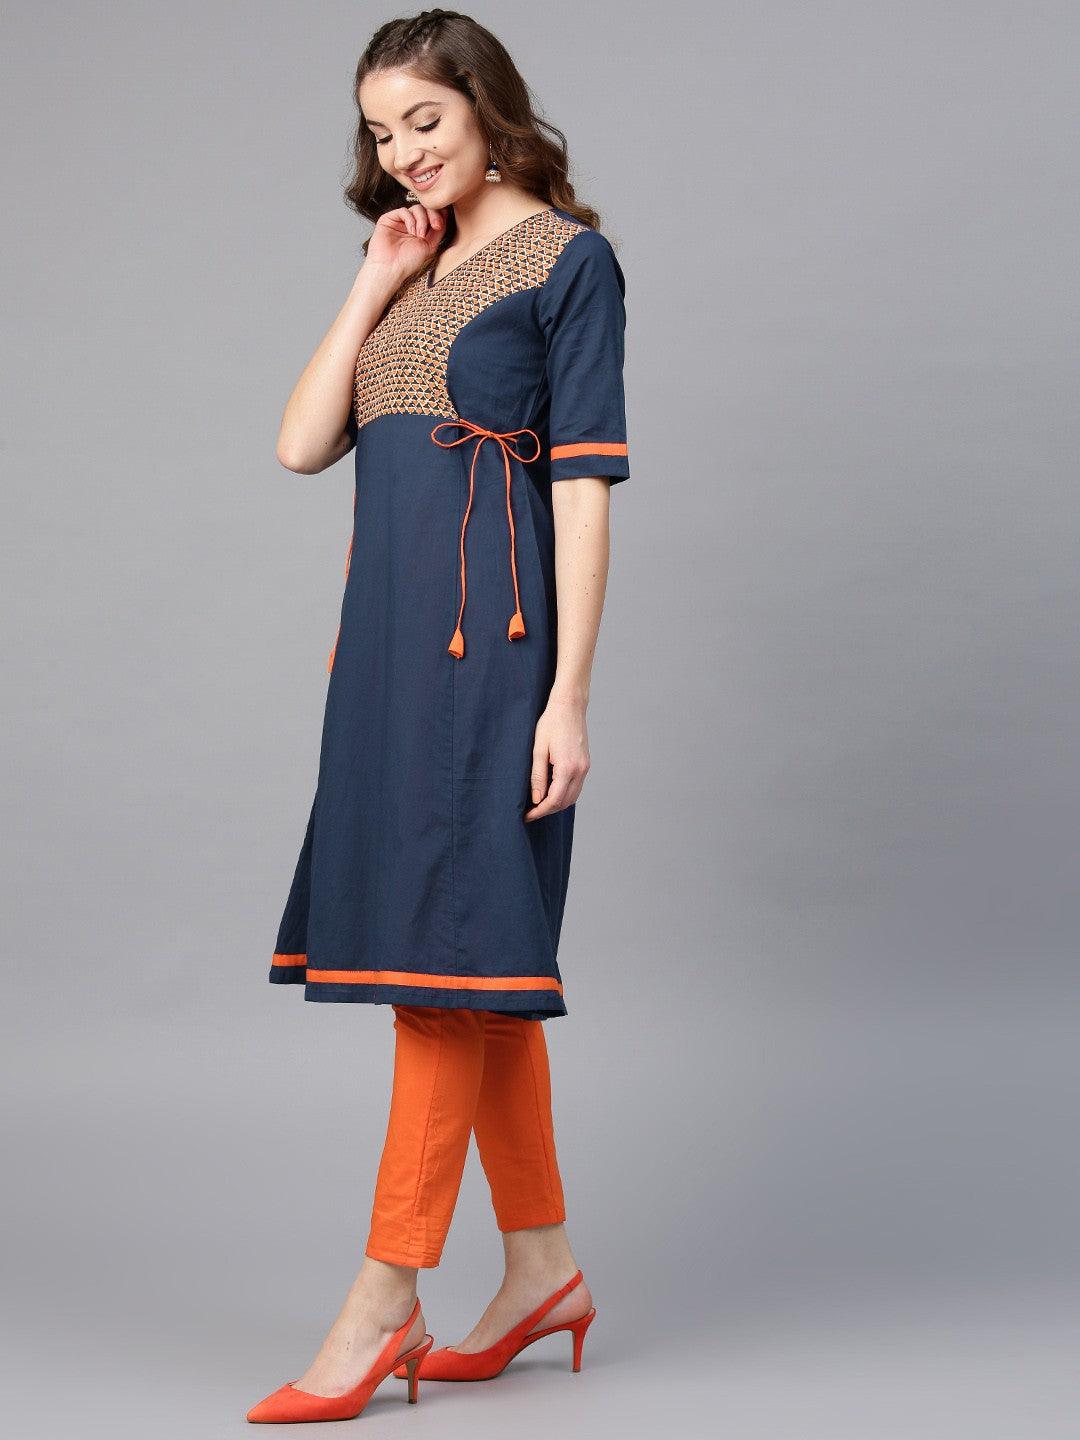 Blue Solid A-Line Kurta With Printed Yoke (Fully Stitched) - Znxclothing